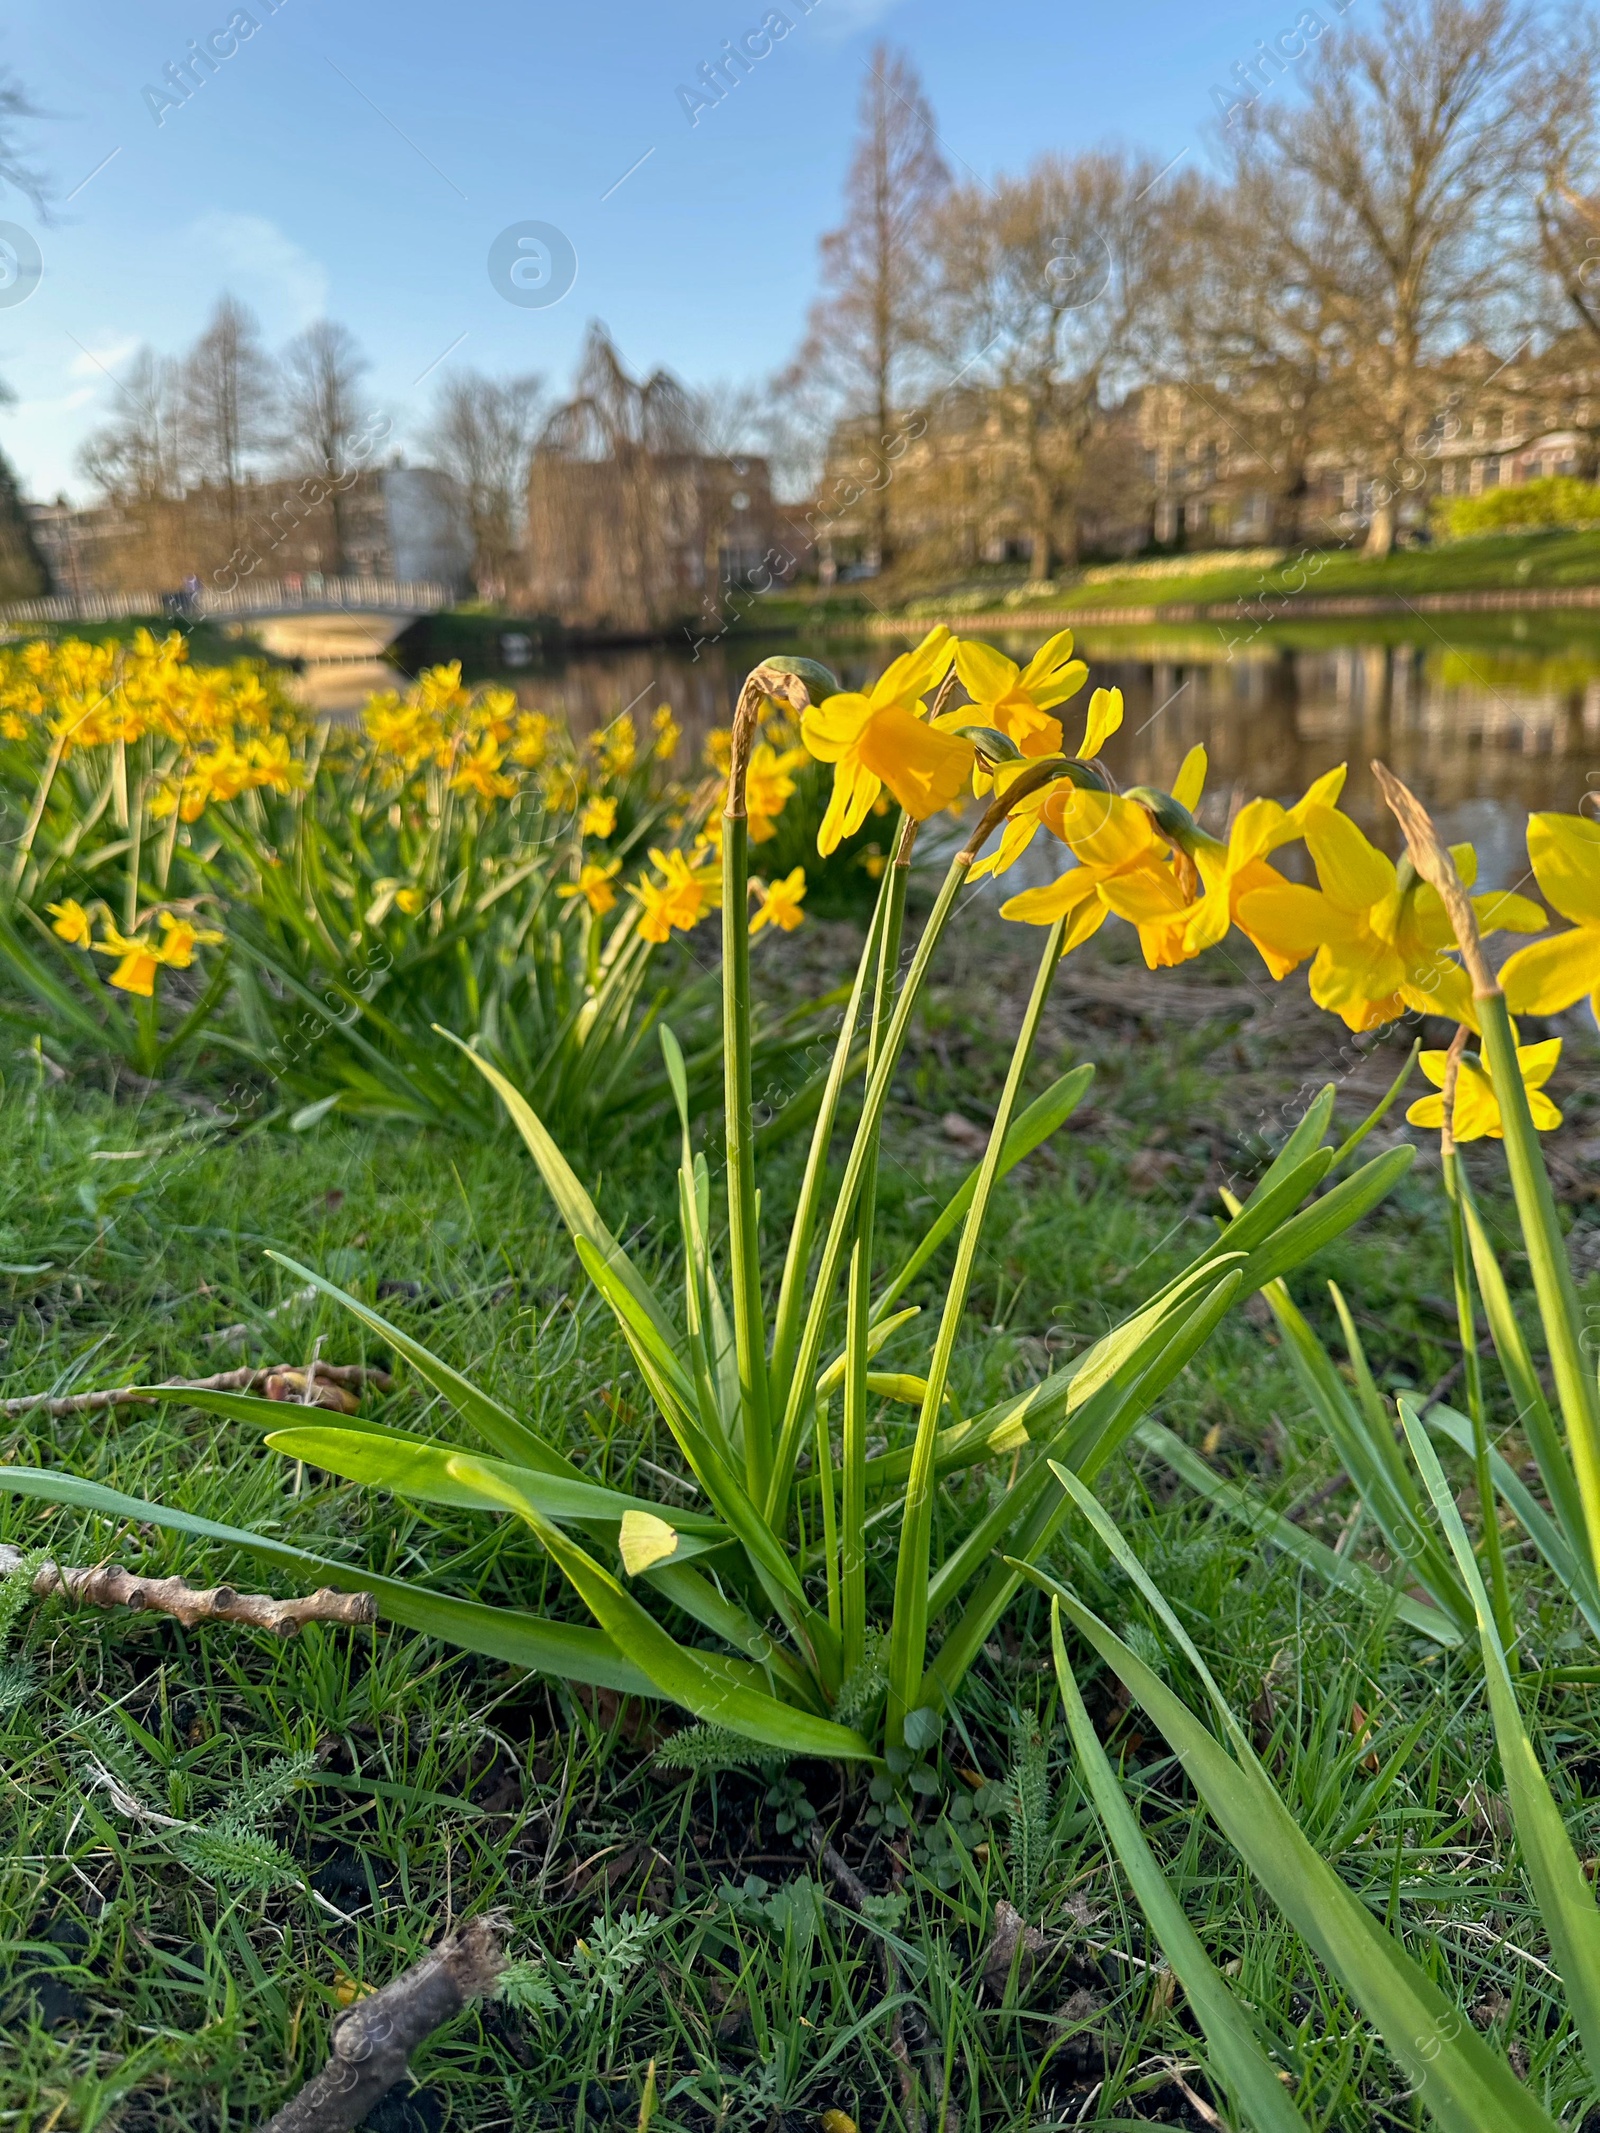 Photo of Yellow narcissus flowers and green grass growing outdoors